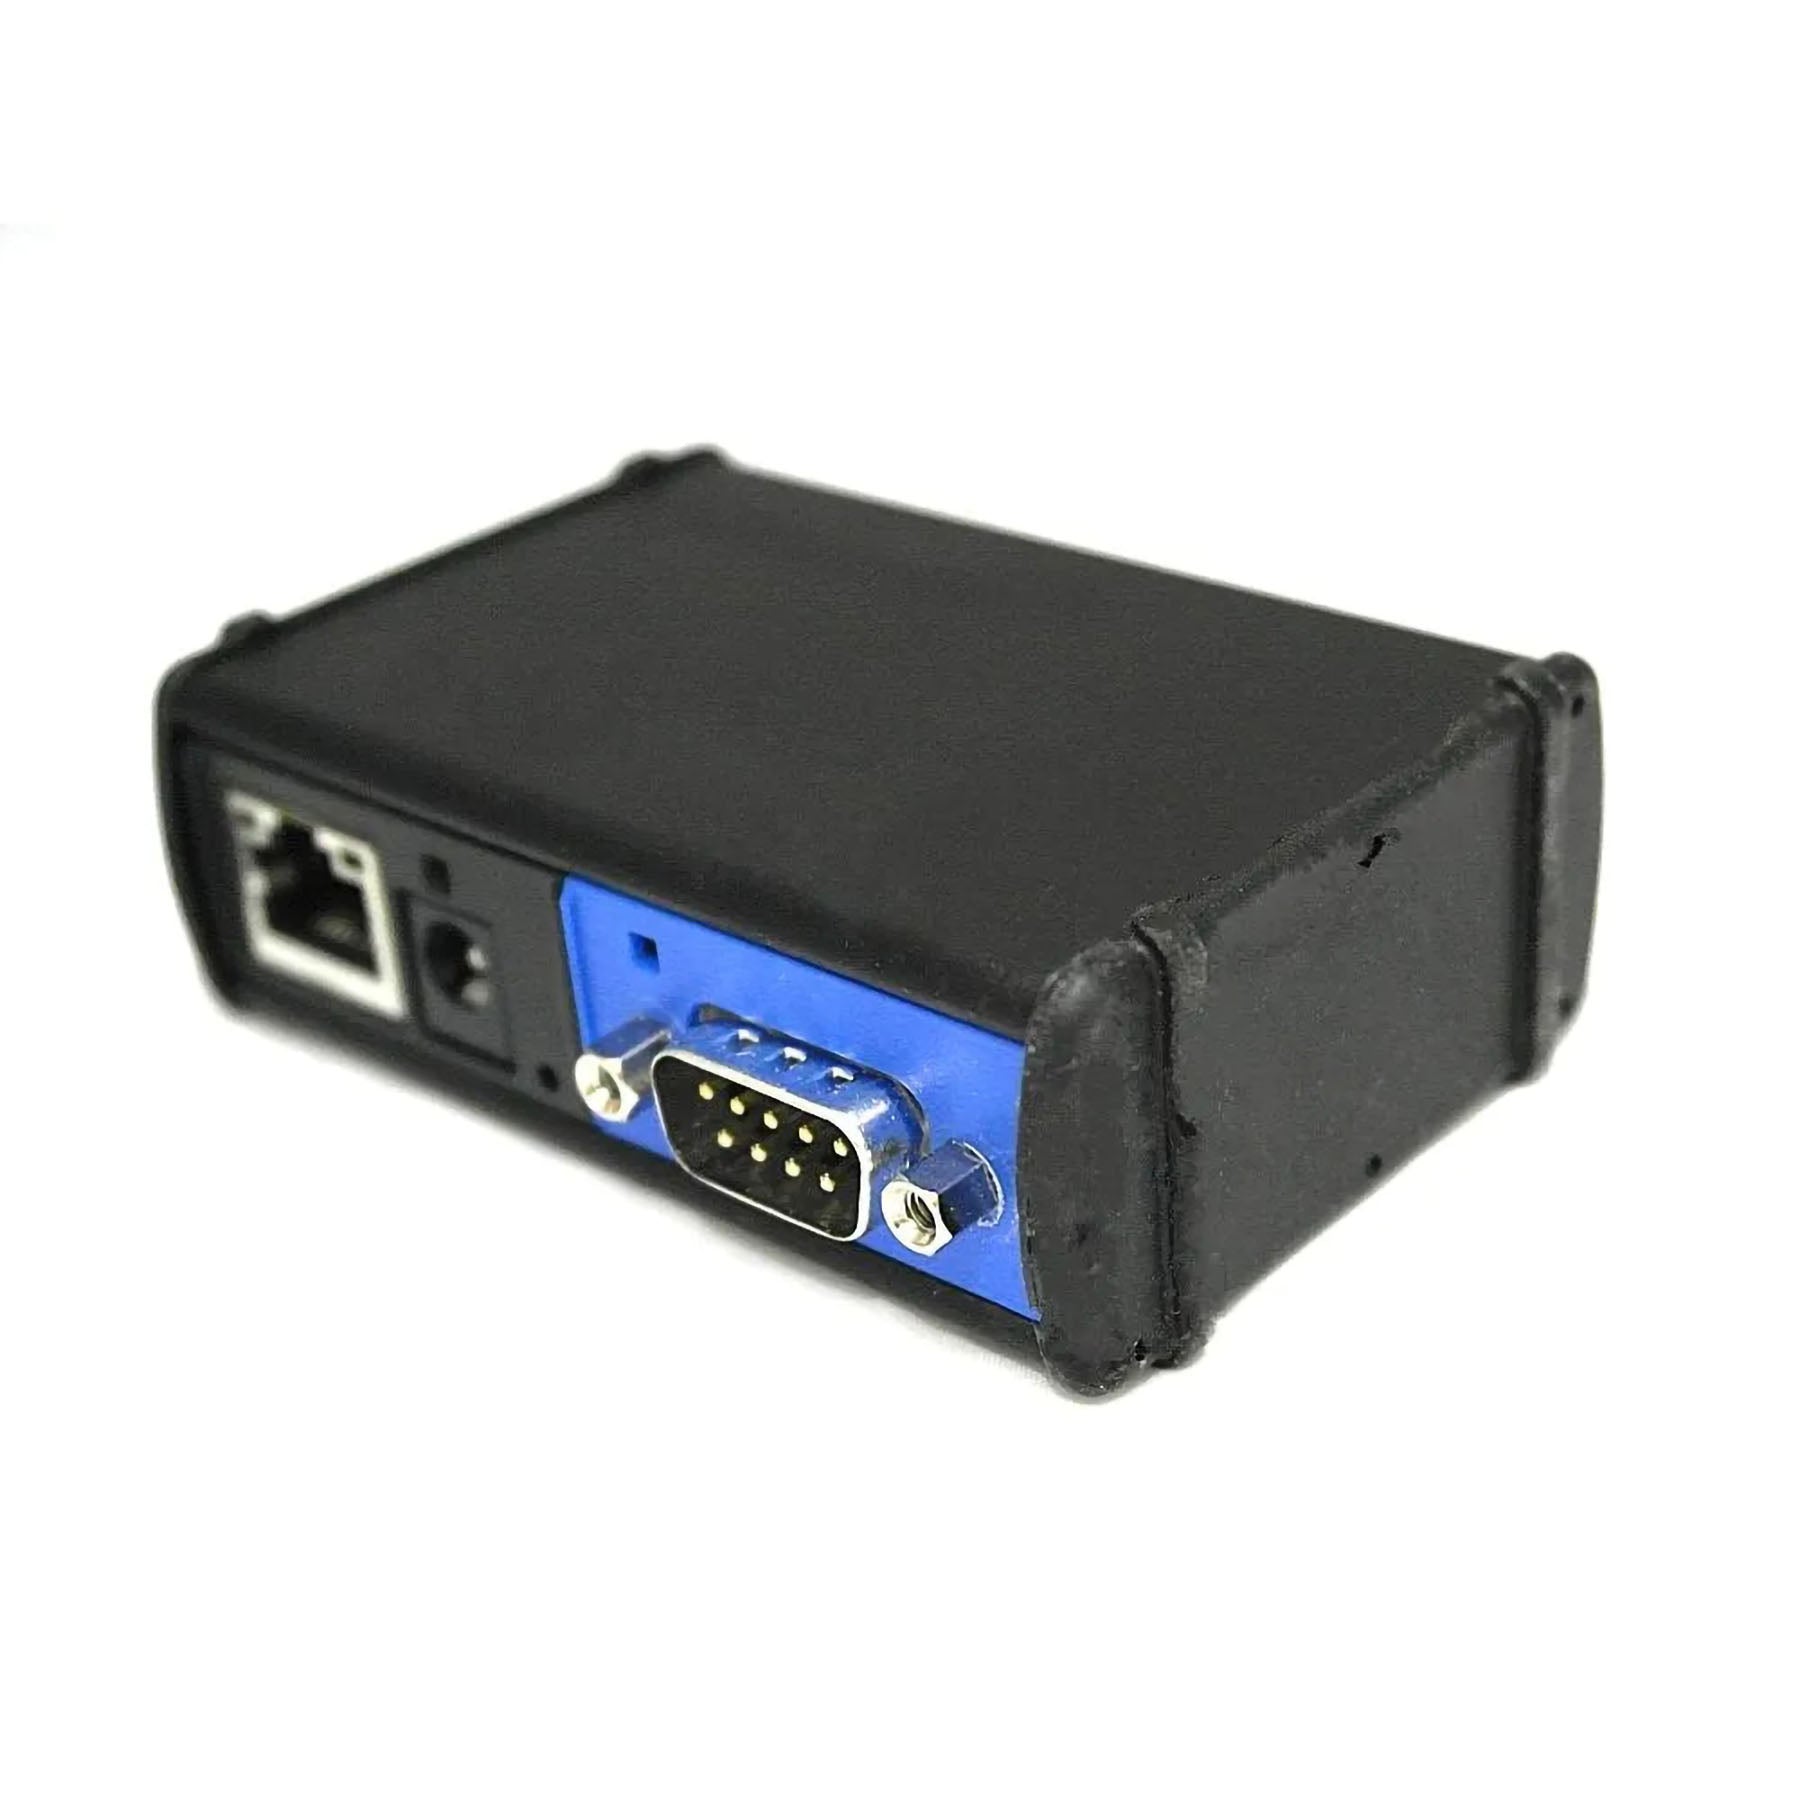 Revox Global Caché iTach wired TCP/IP to RS232 with PoE